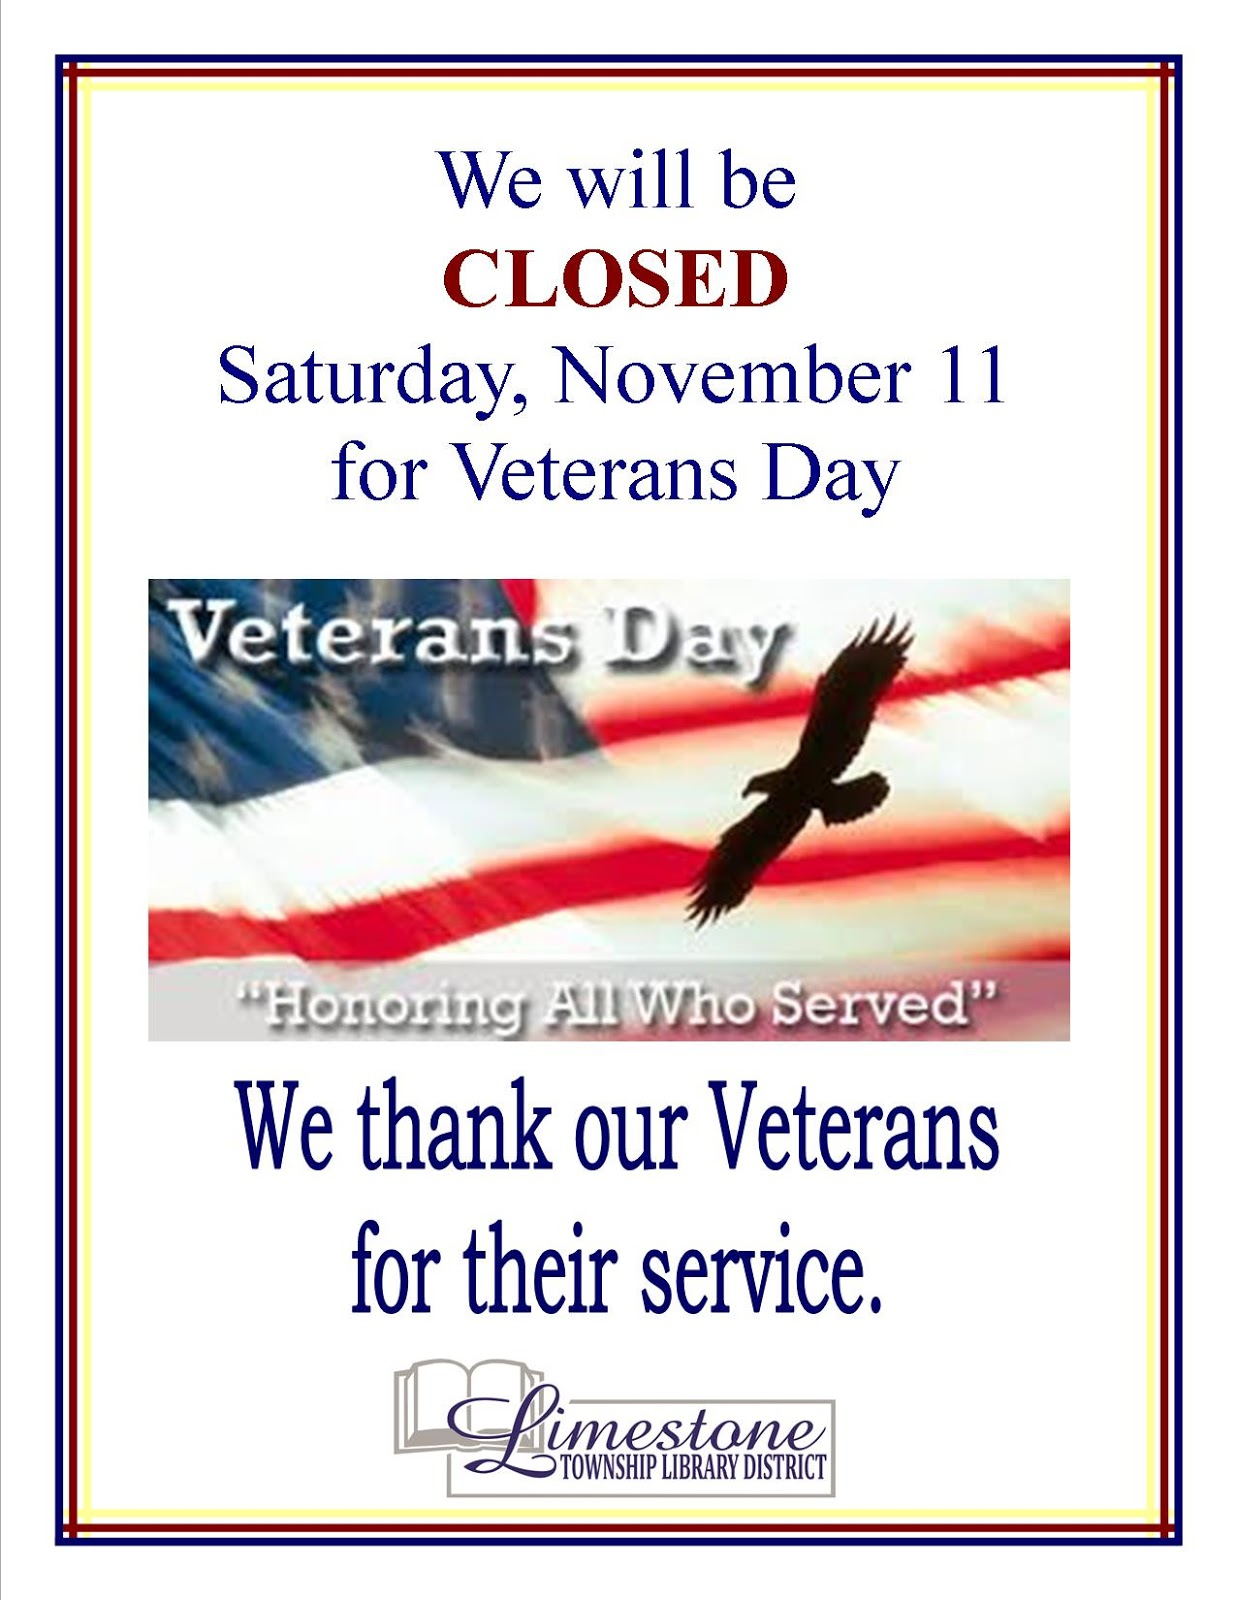 Limestone Township Library District Closed For Veteran s Day